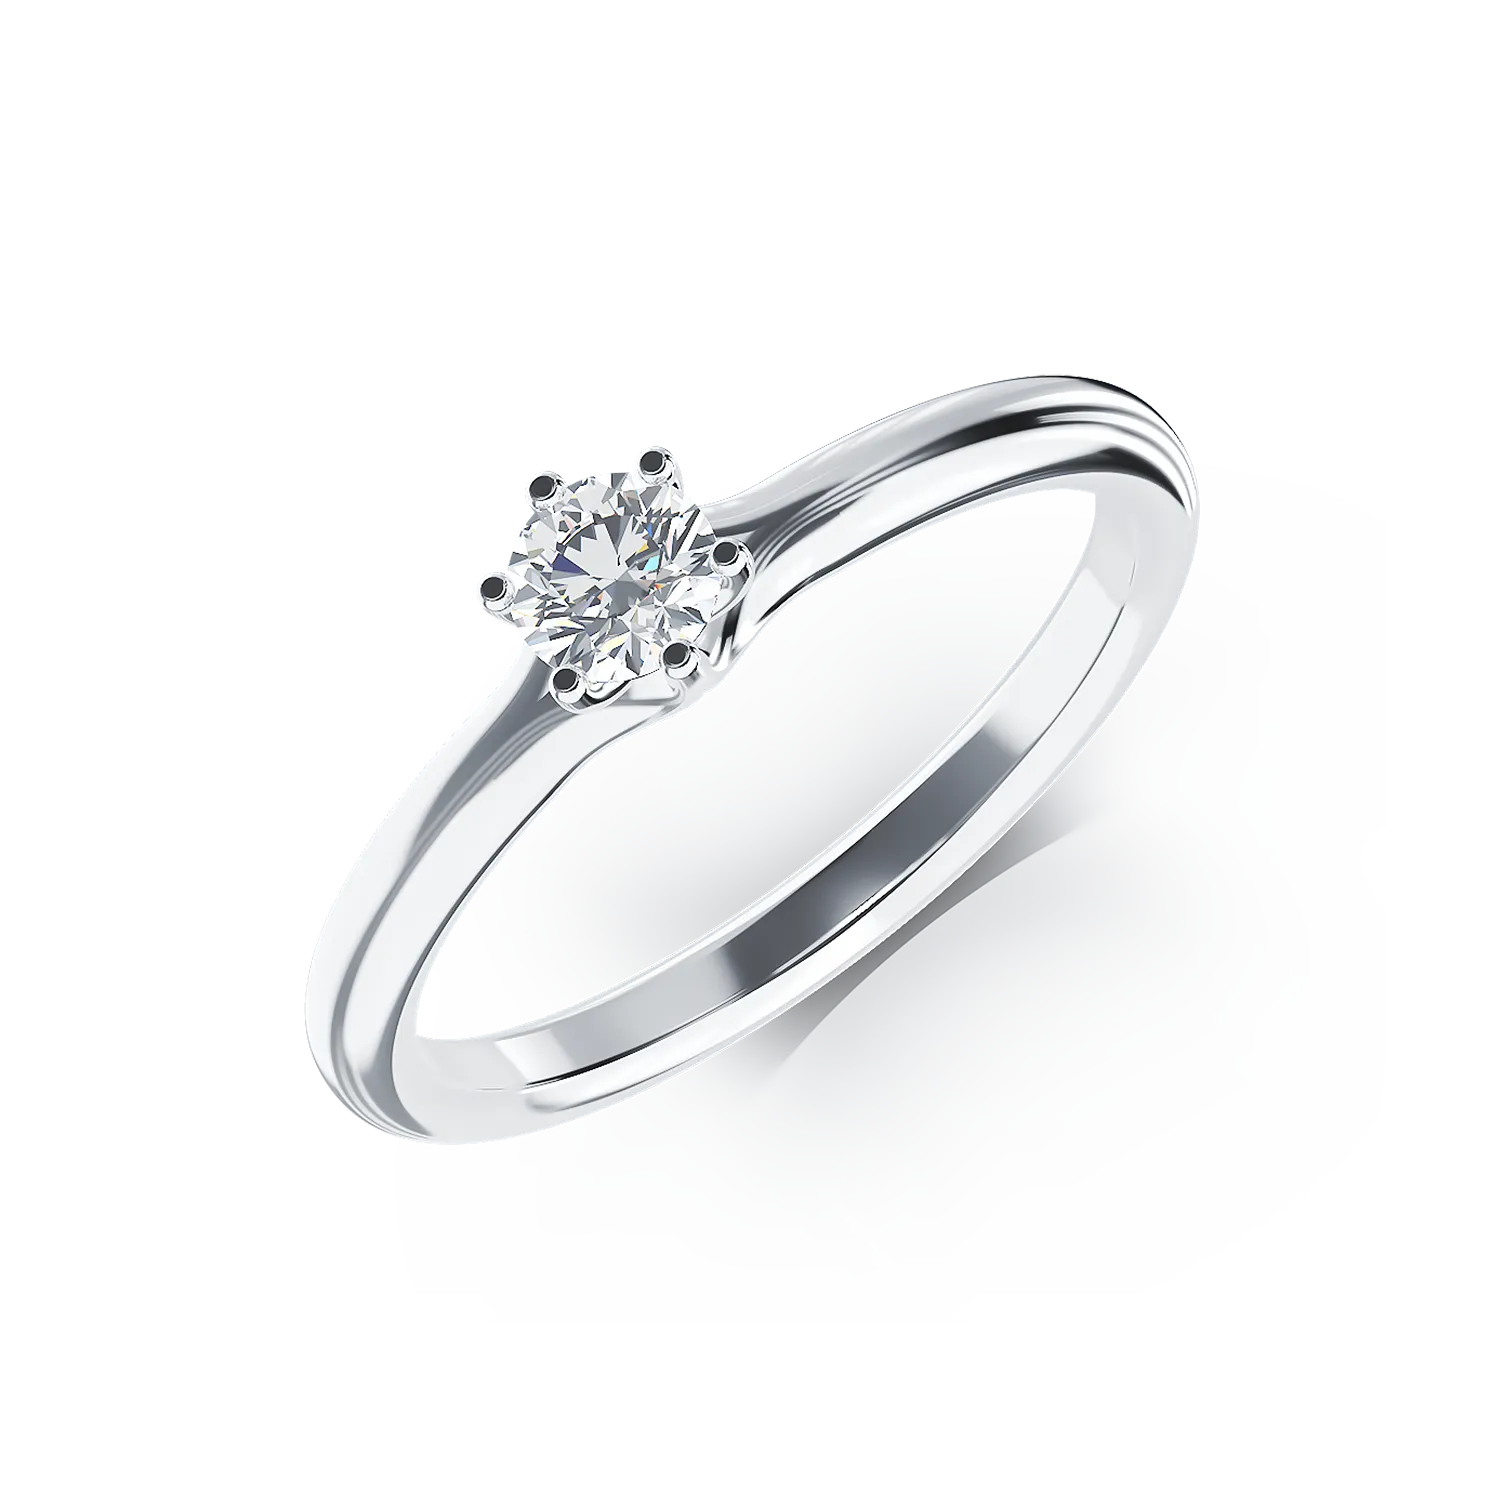 Platinum engagement ring with a 0.19ct solitaire diamond